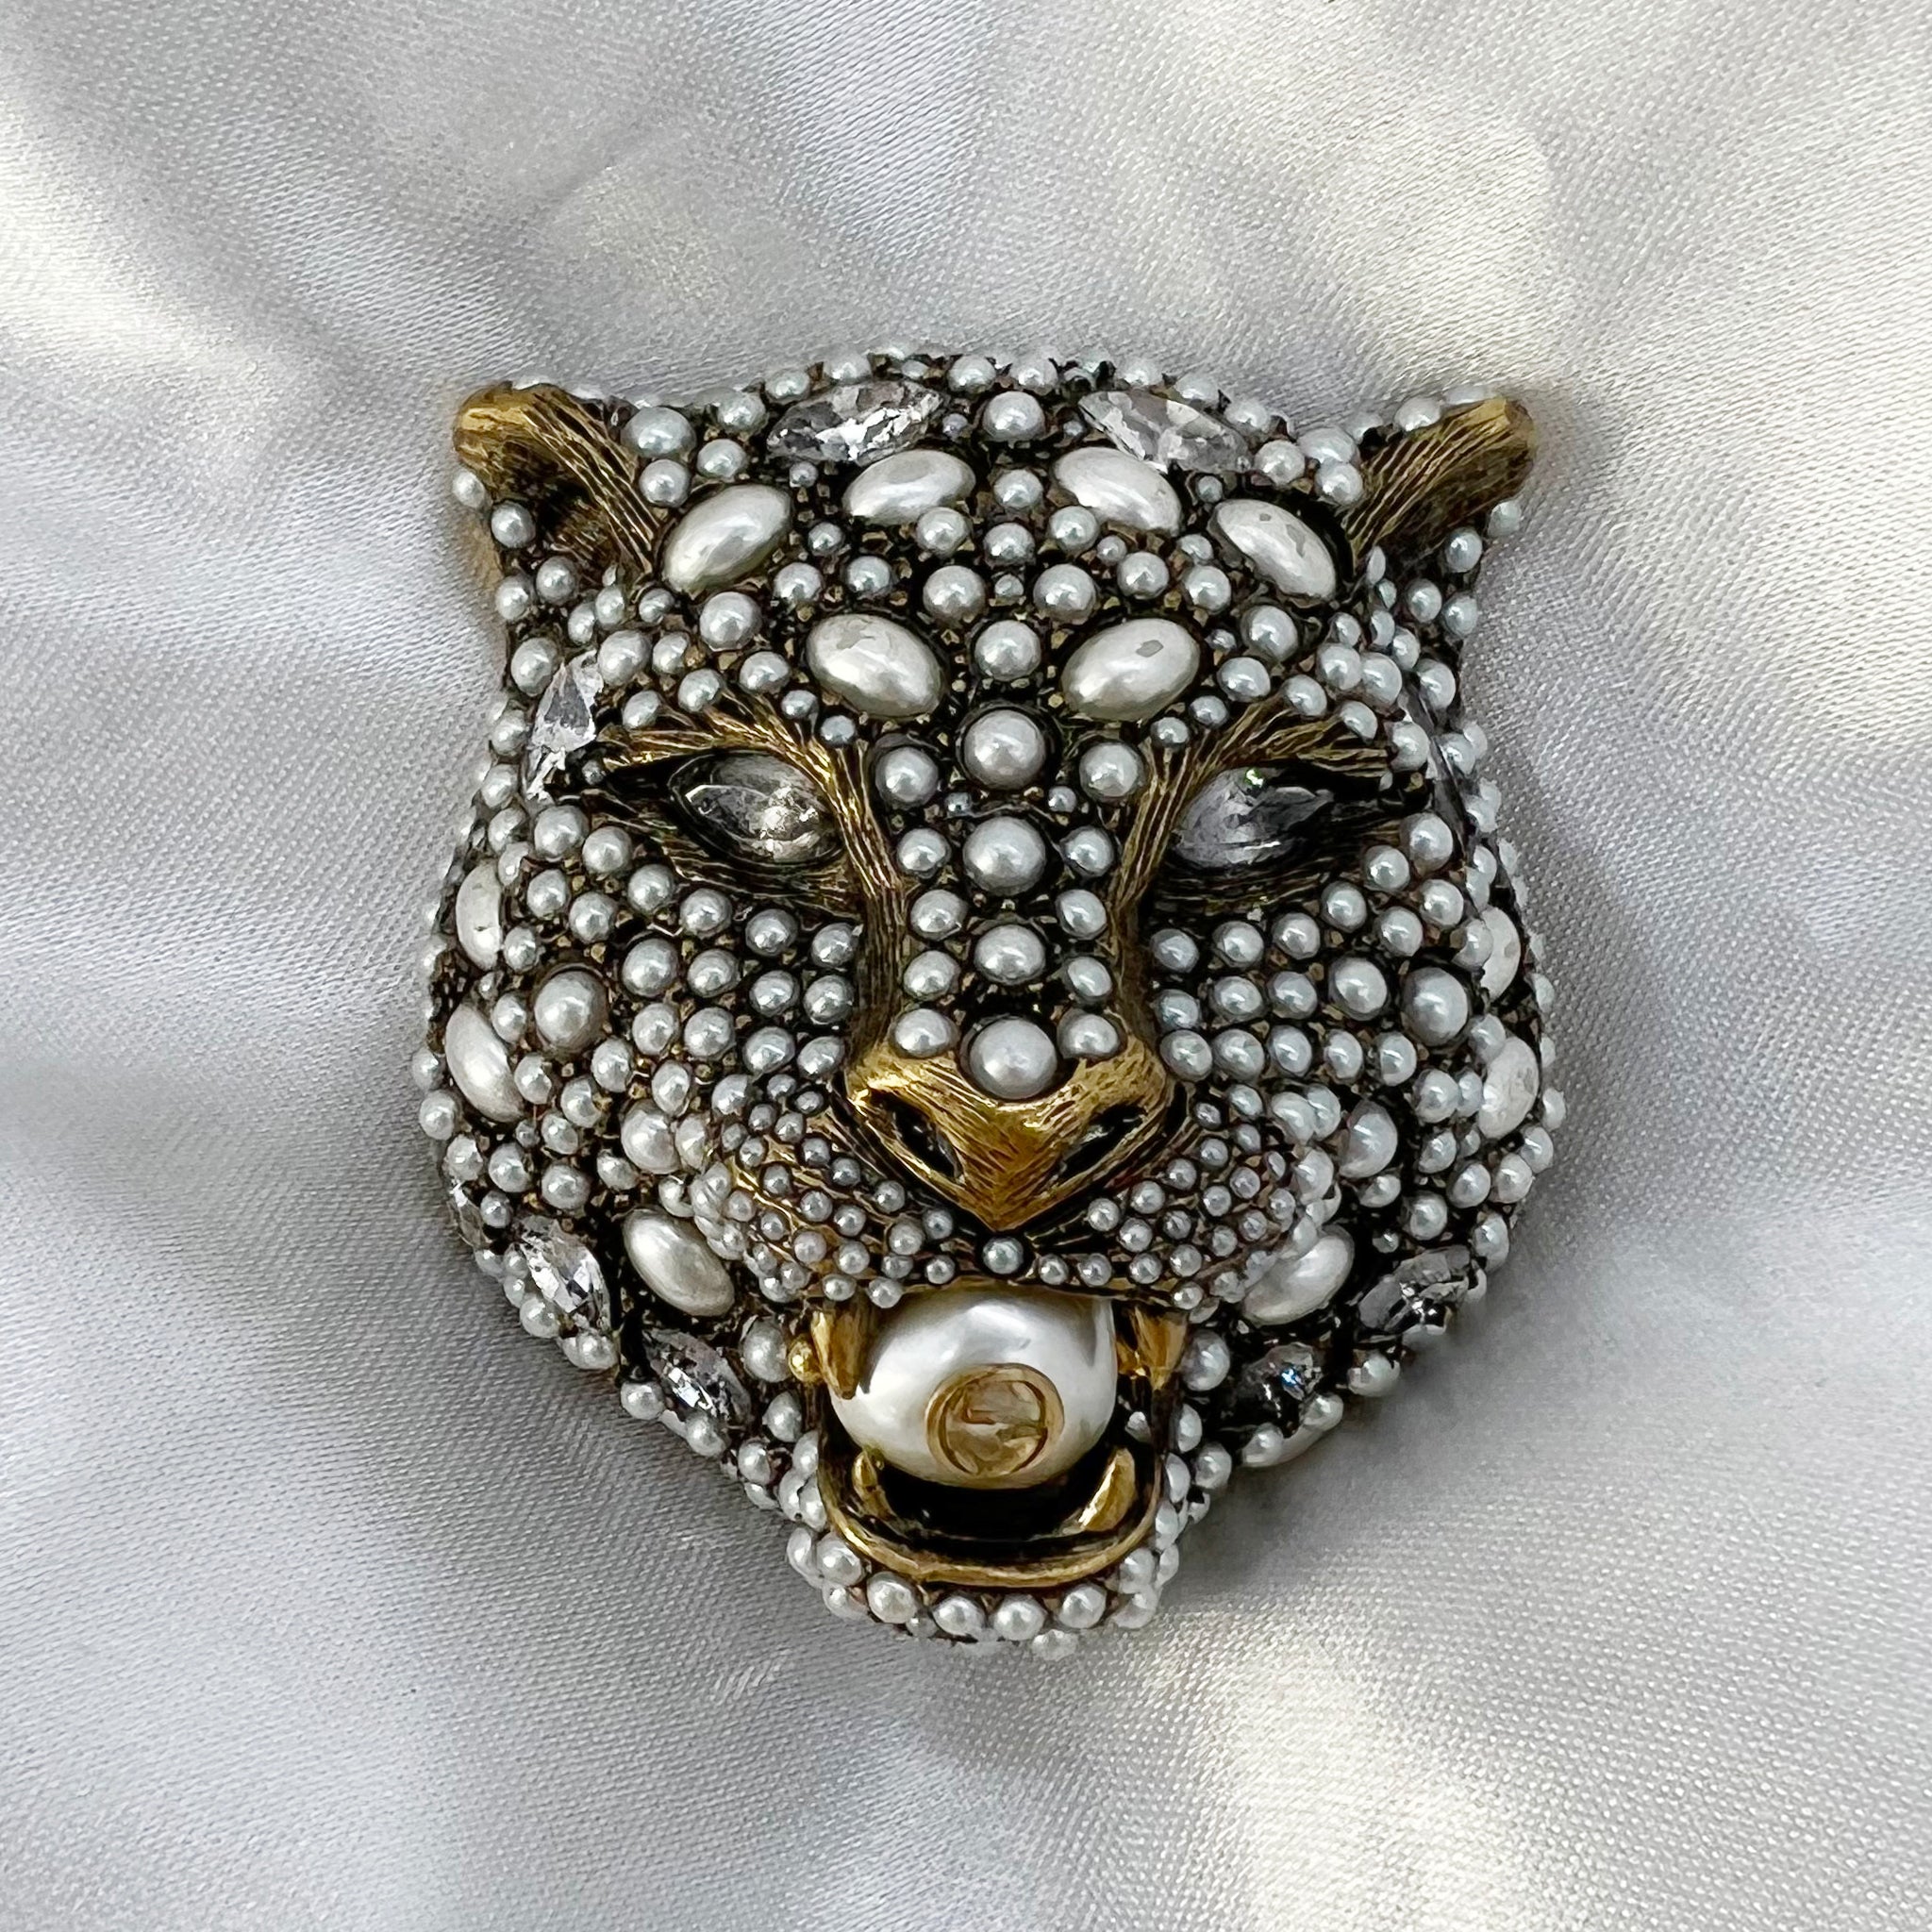 Guaranteed Authentic Gucci Metallic Chunky Faux Pearl Felin Head Brooch w/out Pin (Head Only)